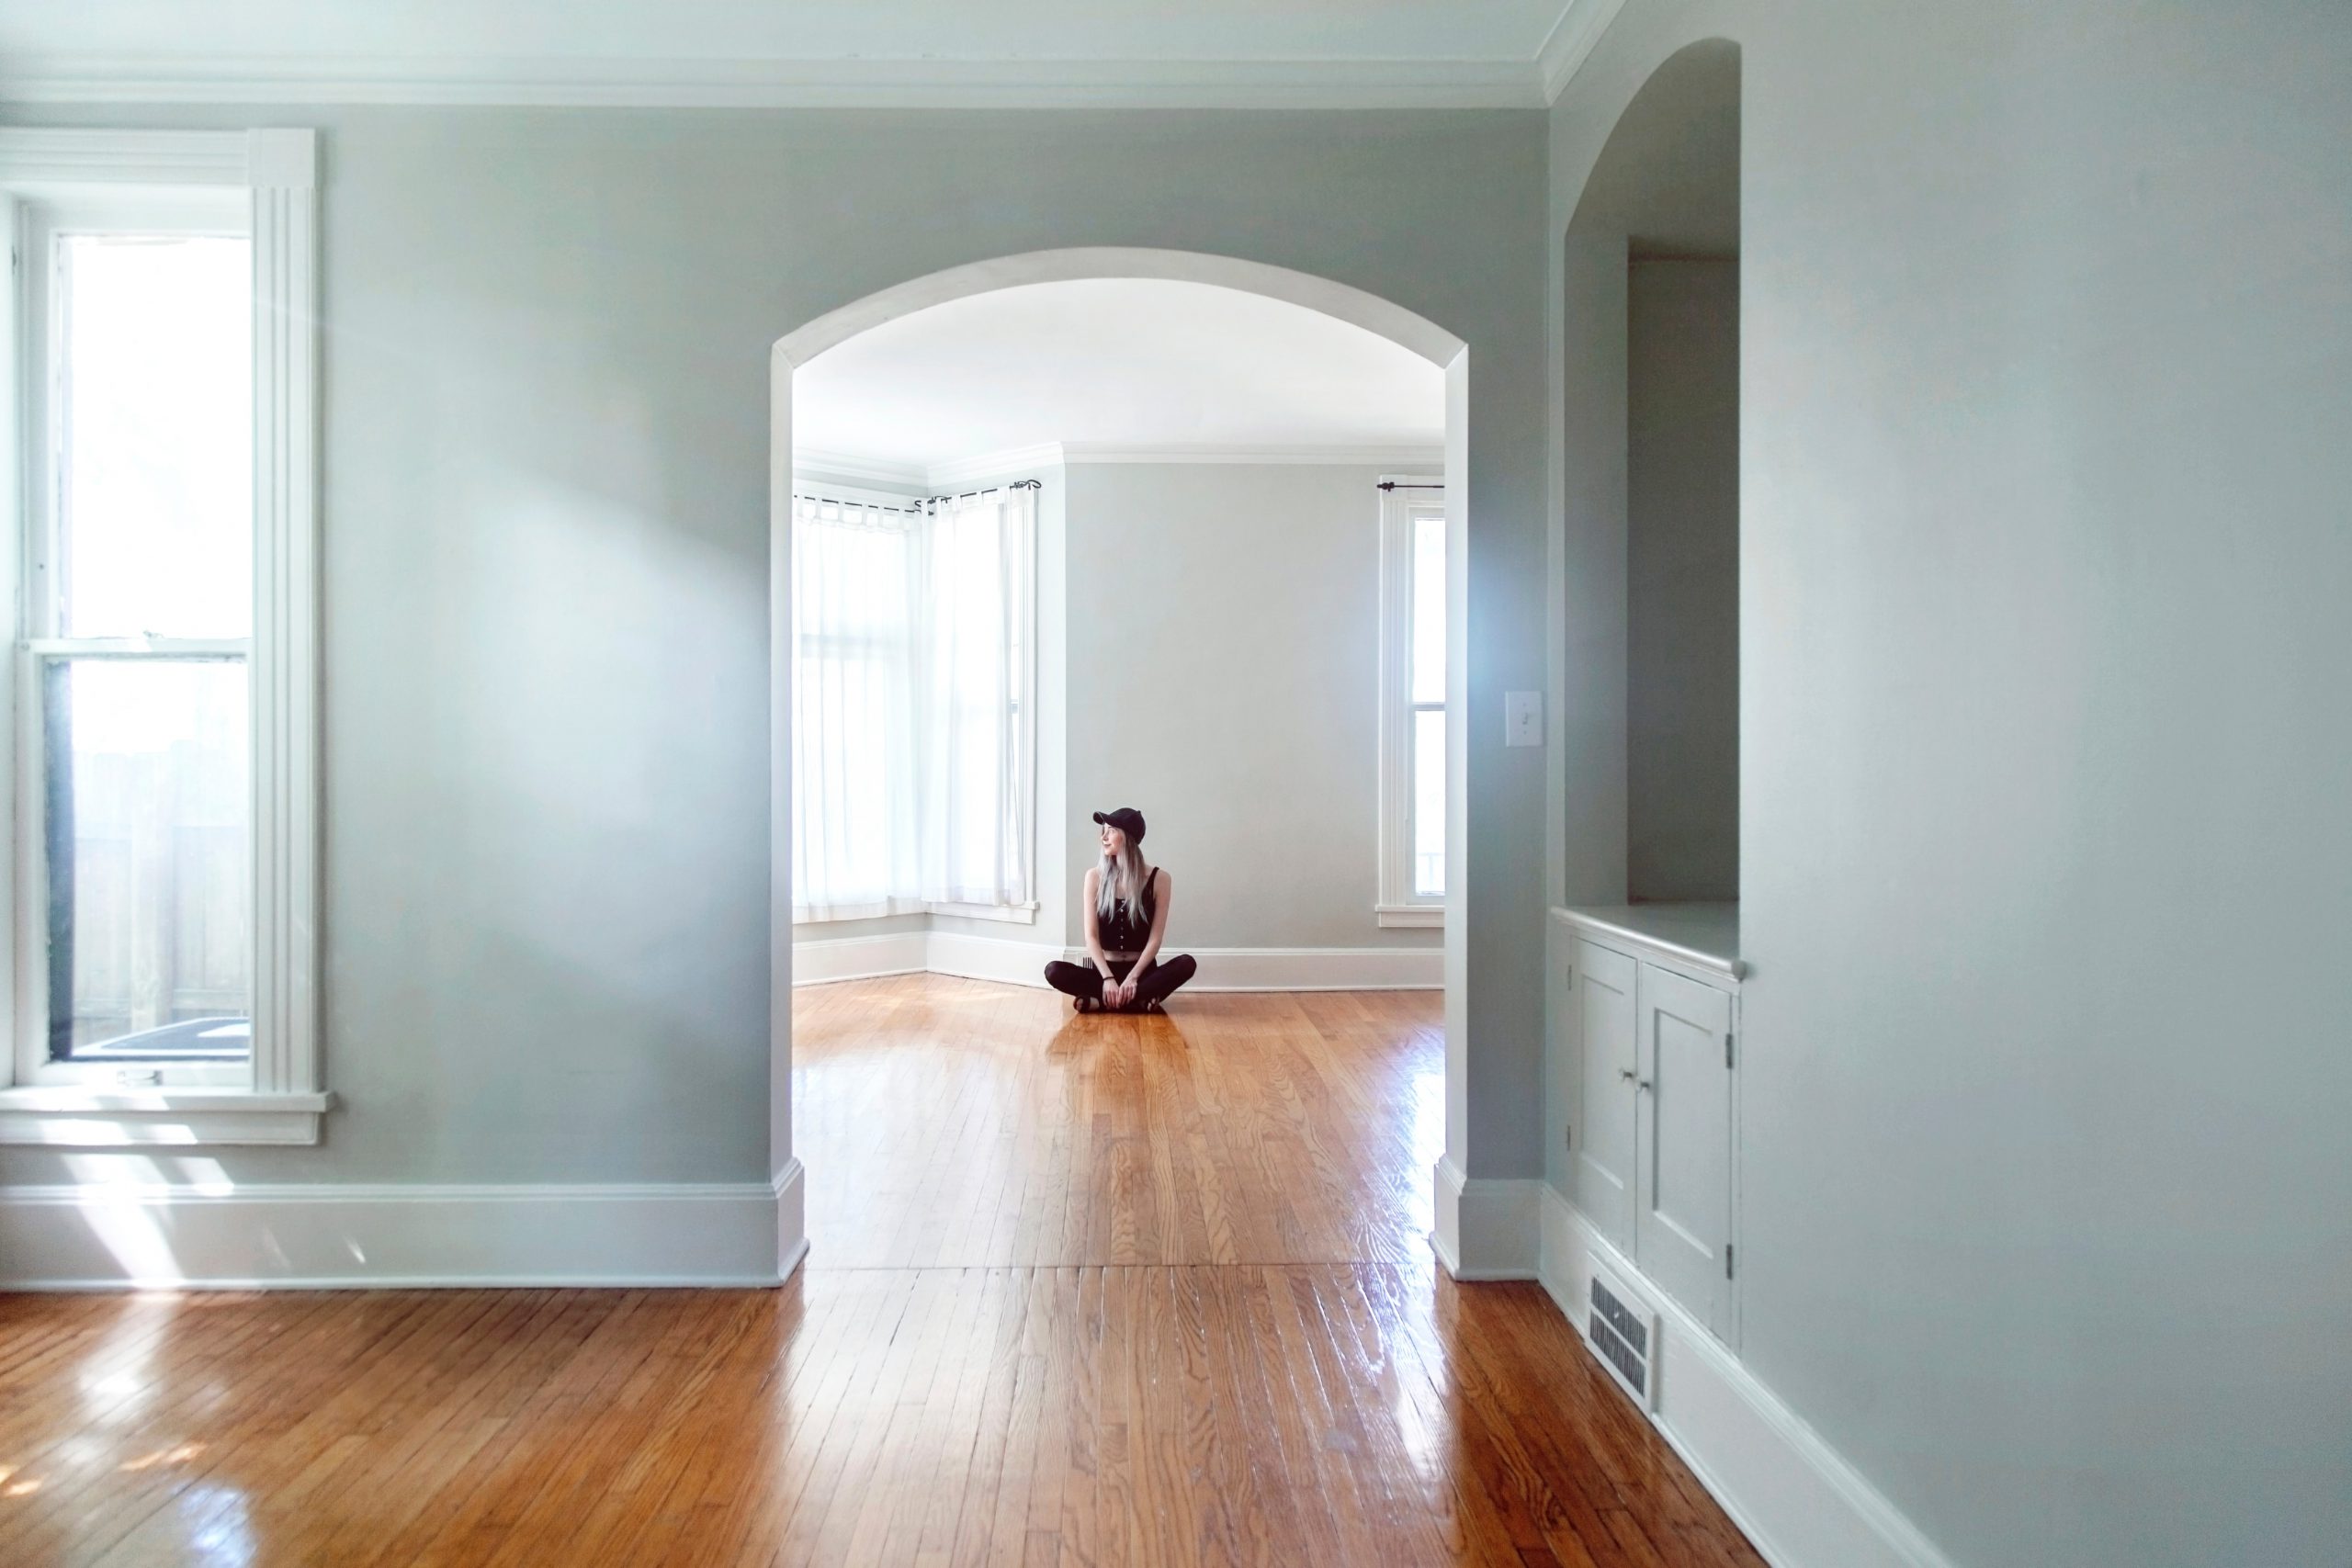 Image of a girl sitting inside a character home with wooden floors